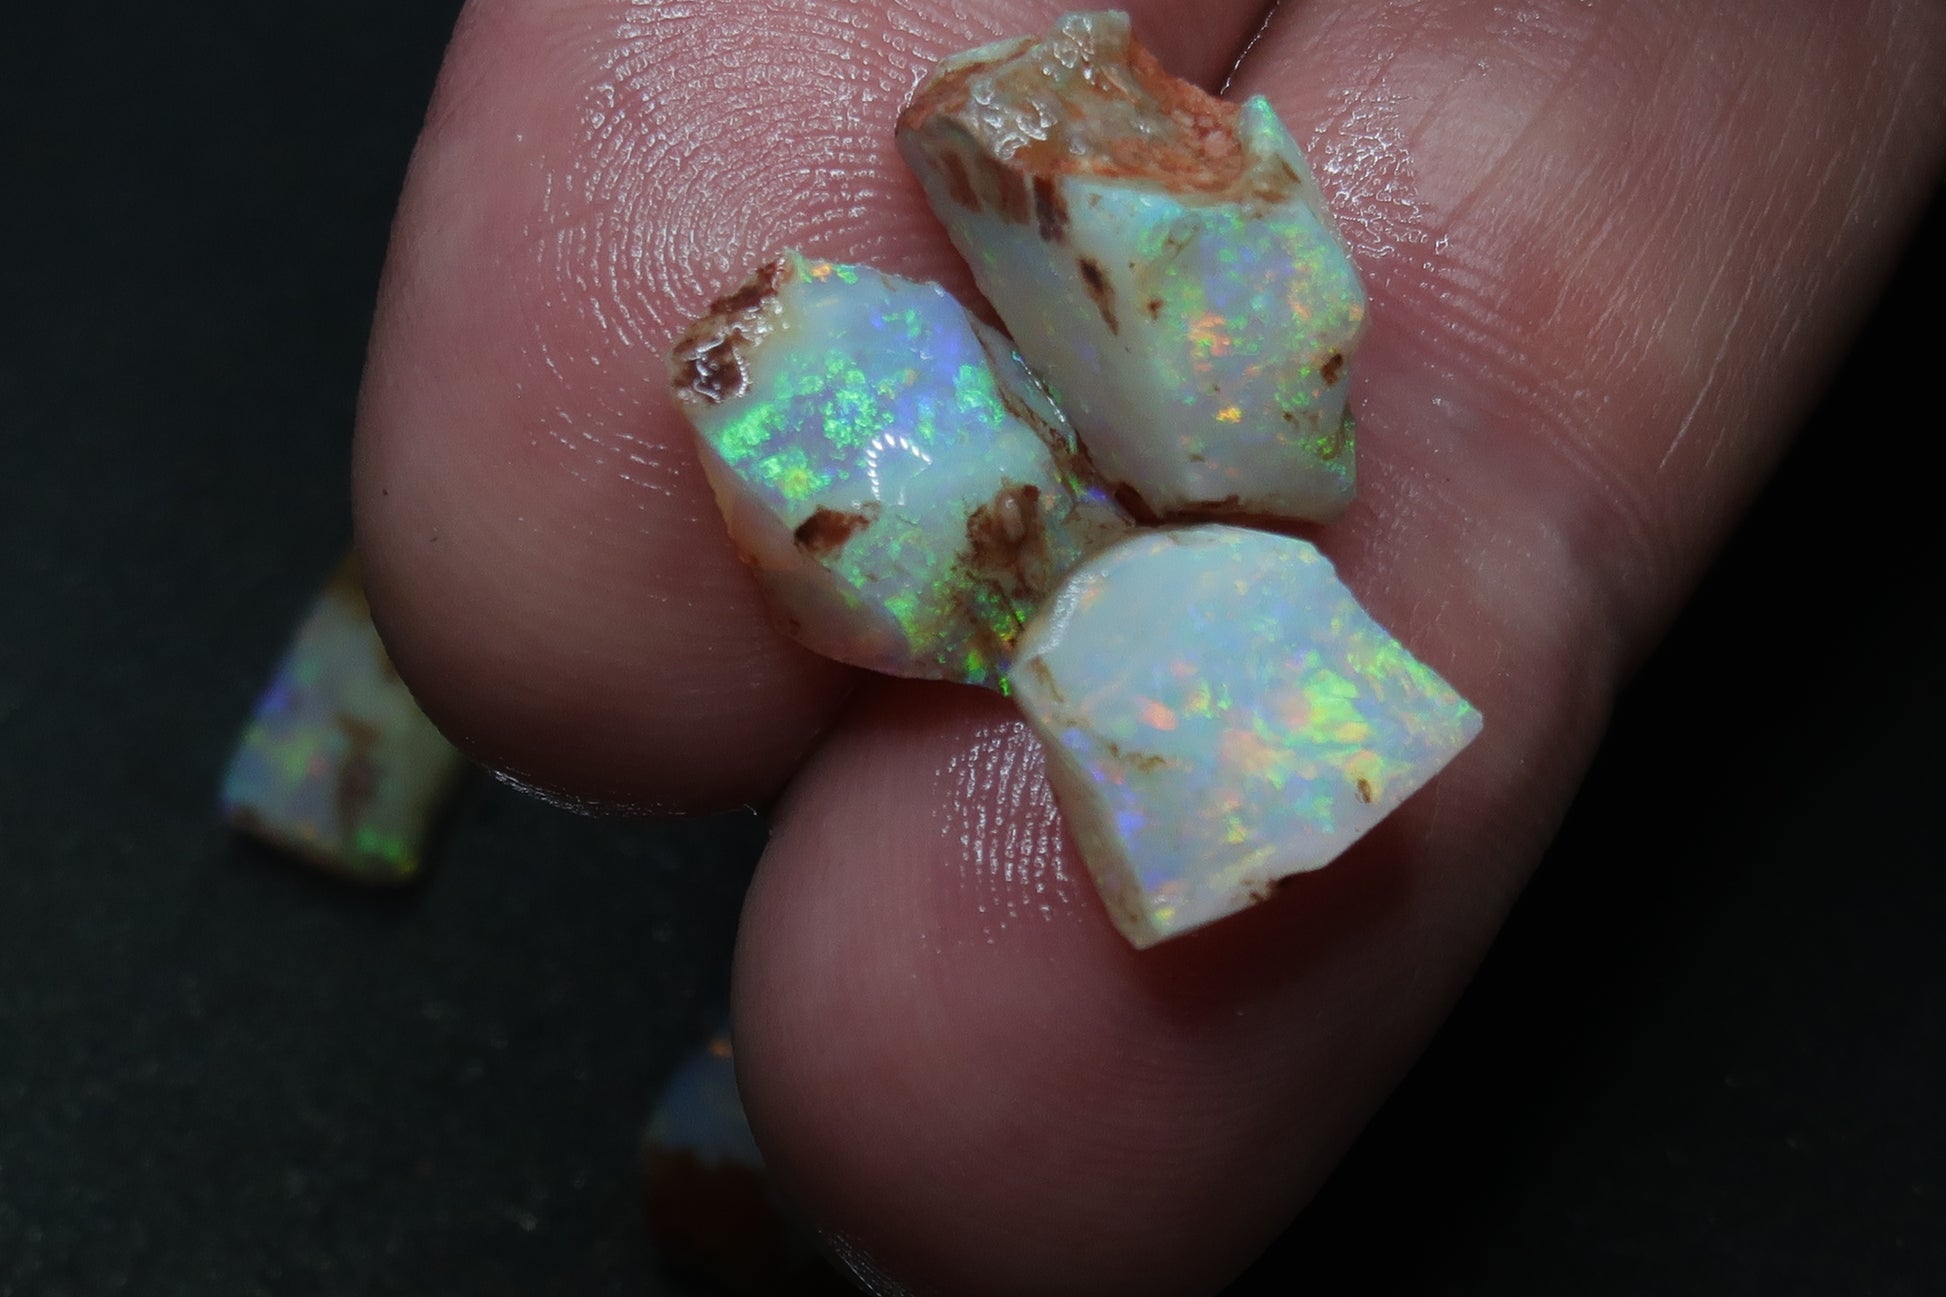 0.2oz, 30Cts Coober Pedy White Opal Parcel, 6 Stones, A Grade, Shaped In The Rough, Brilliant Colors Greens,Blues and Reds. - Australian Opal Store